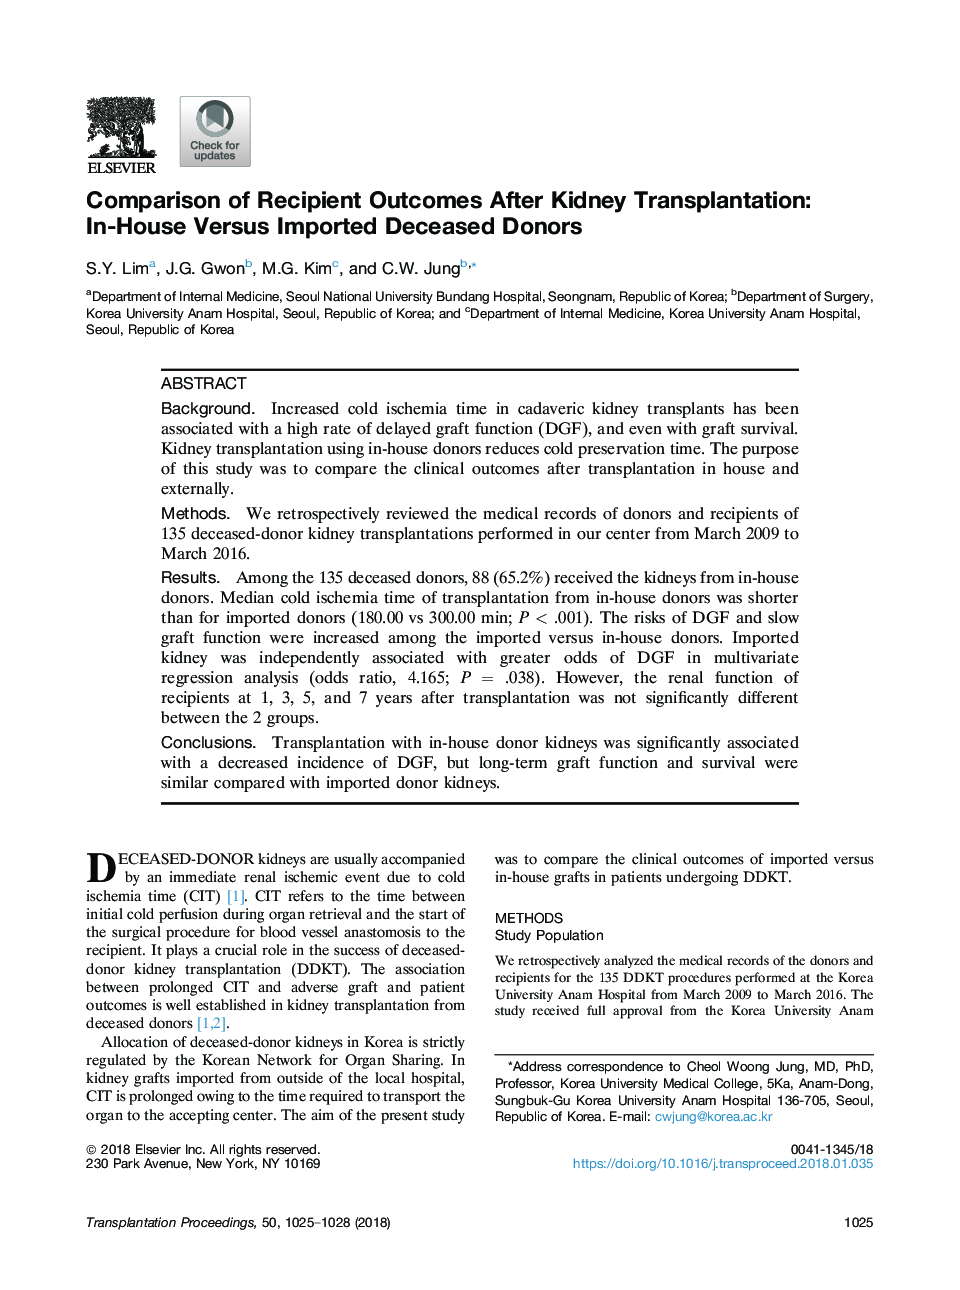 Comparison of Recipient Outcomes After Kidney Transplantation: In-House Versus Imported Deceased Donors